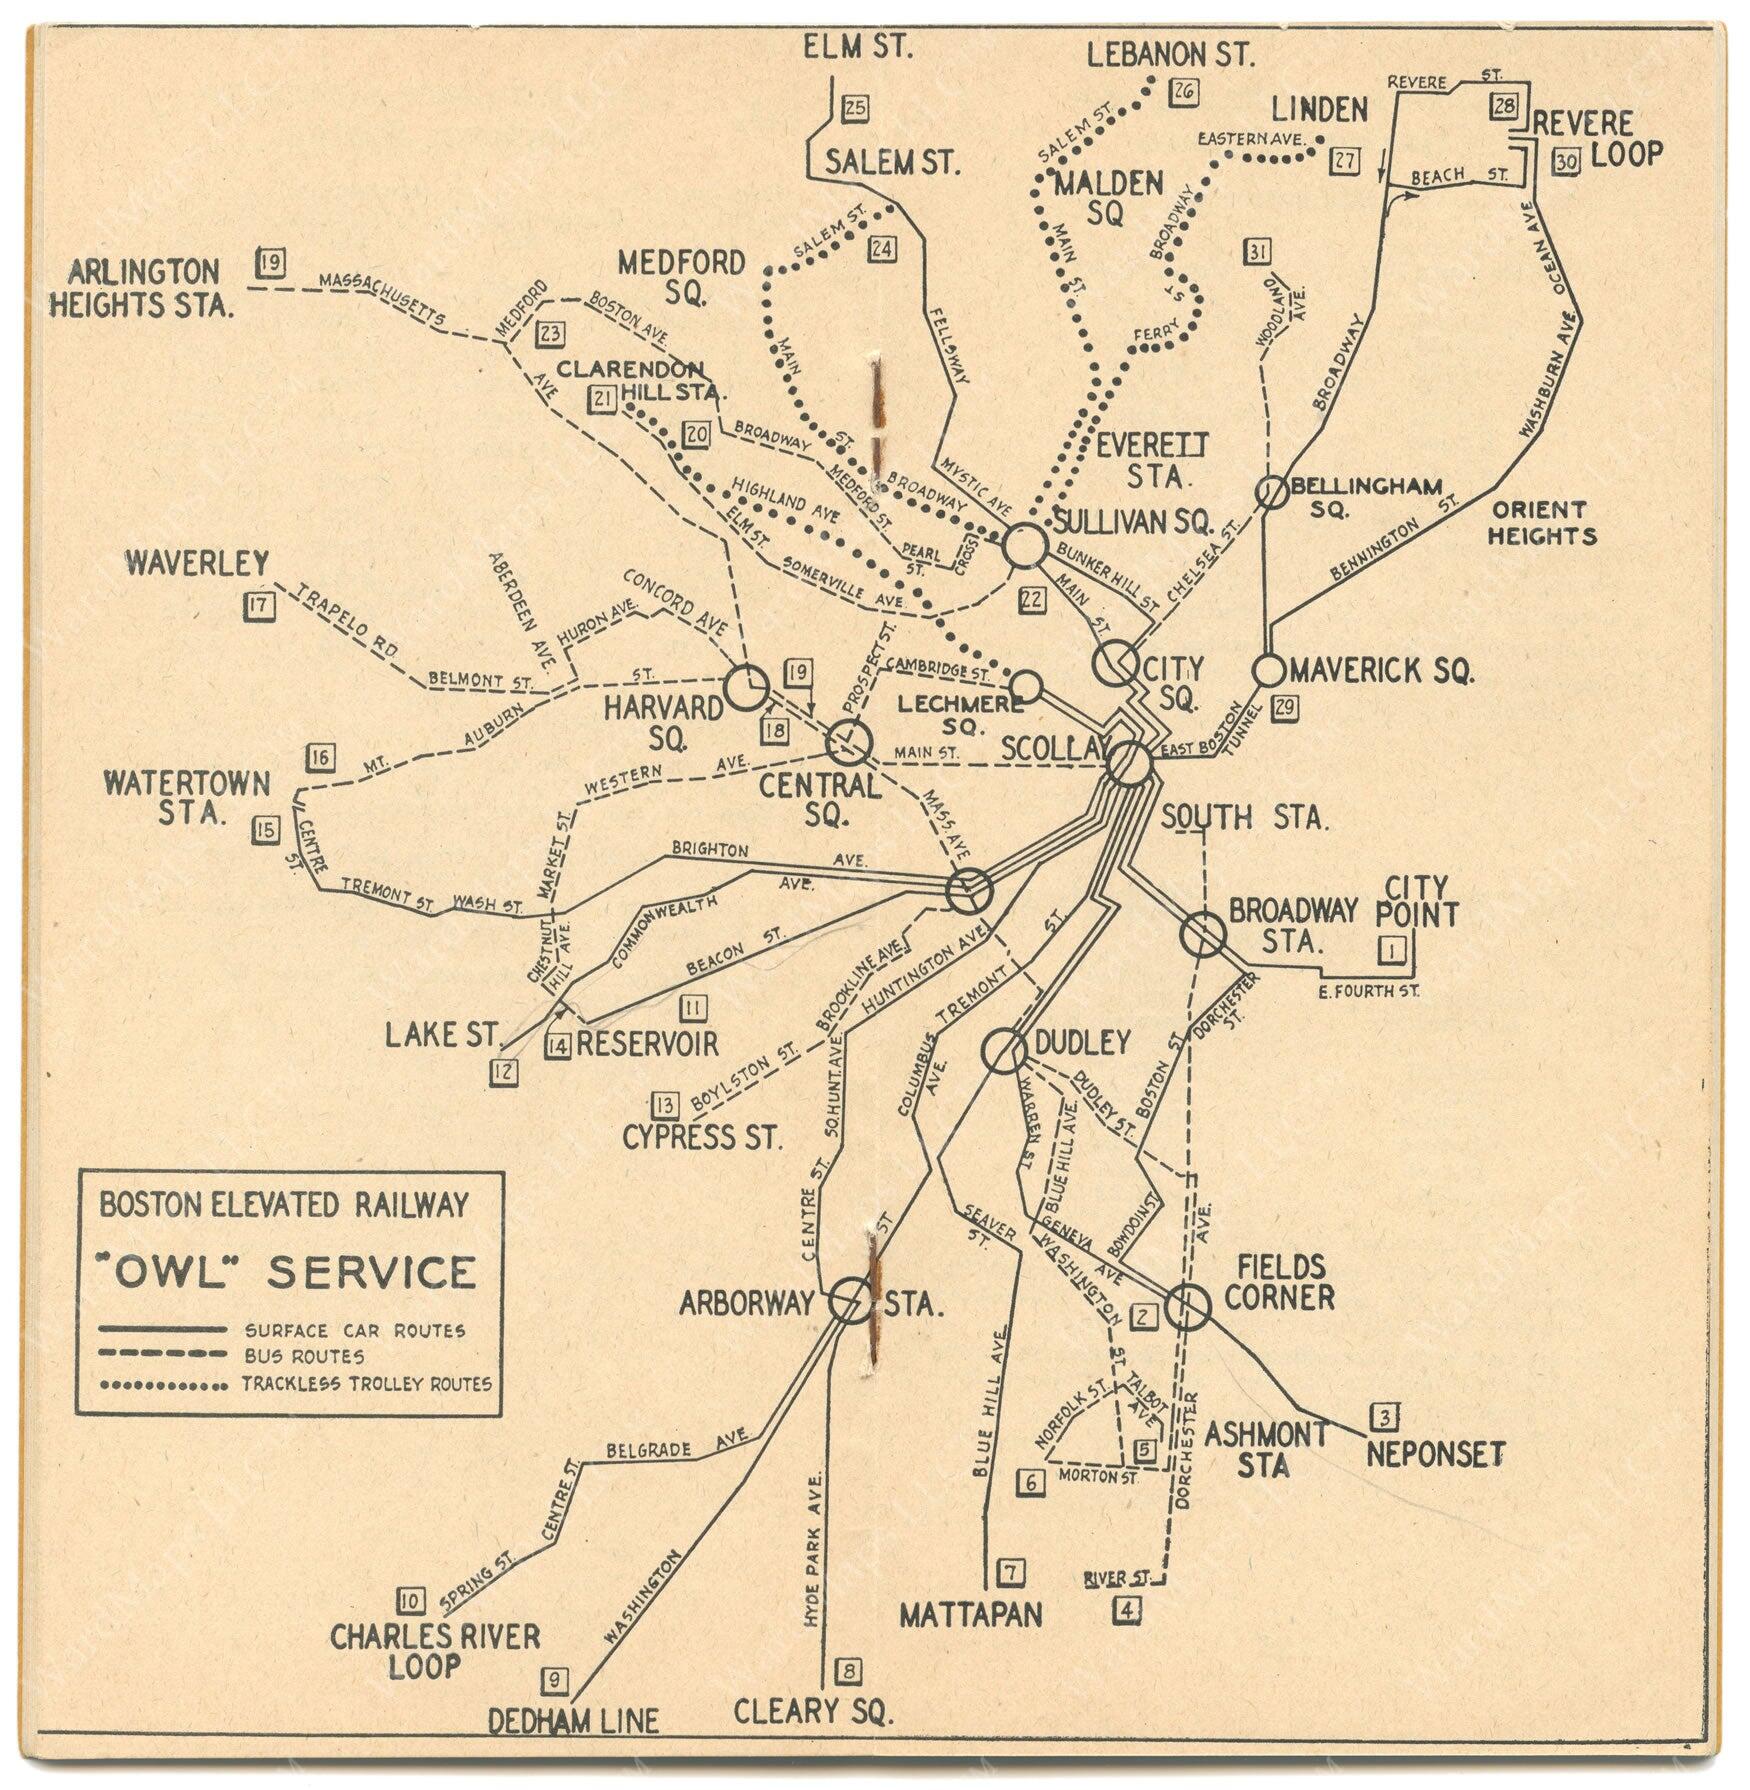 A photo of a printed 1947 paper map showing 